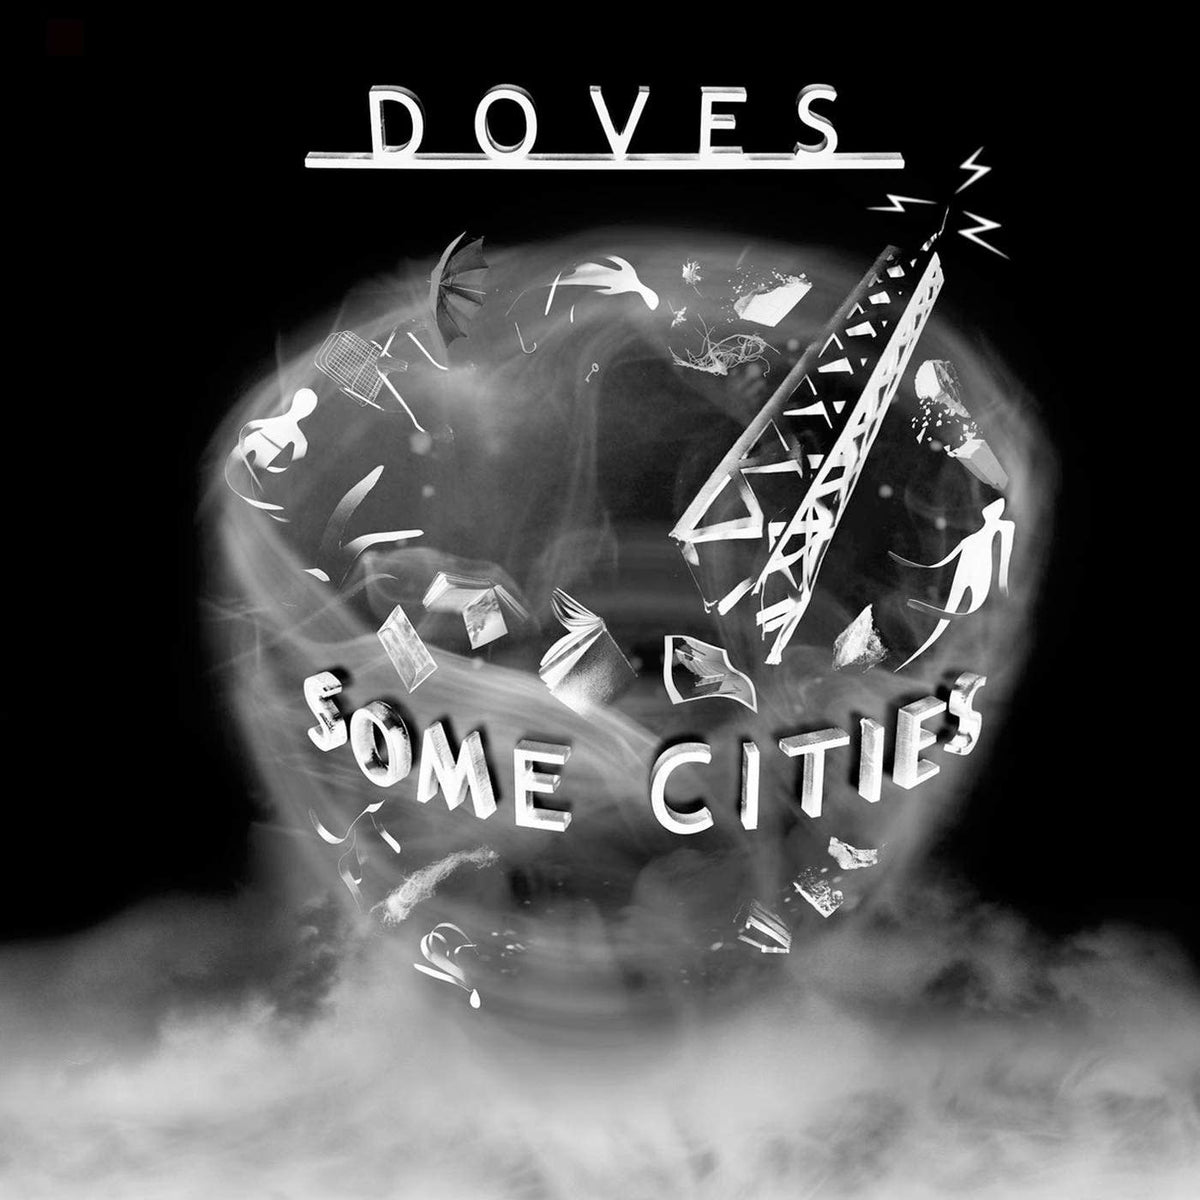 Doves - Some Cities 2LP (Numbered, Colored Vinyl)